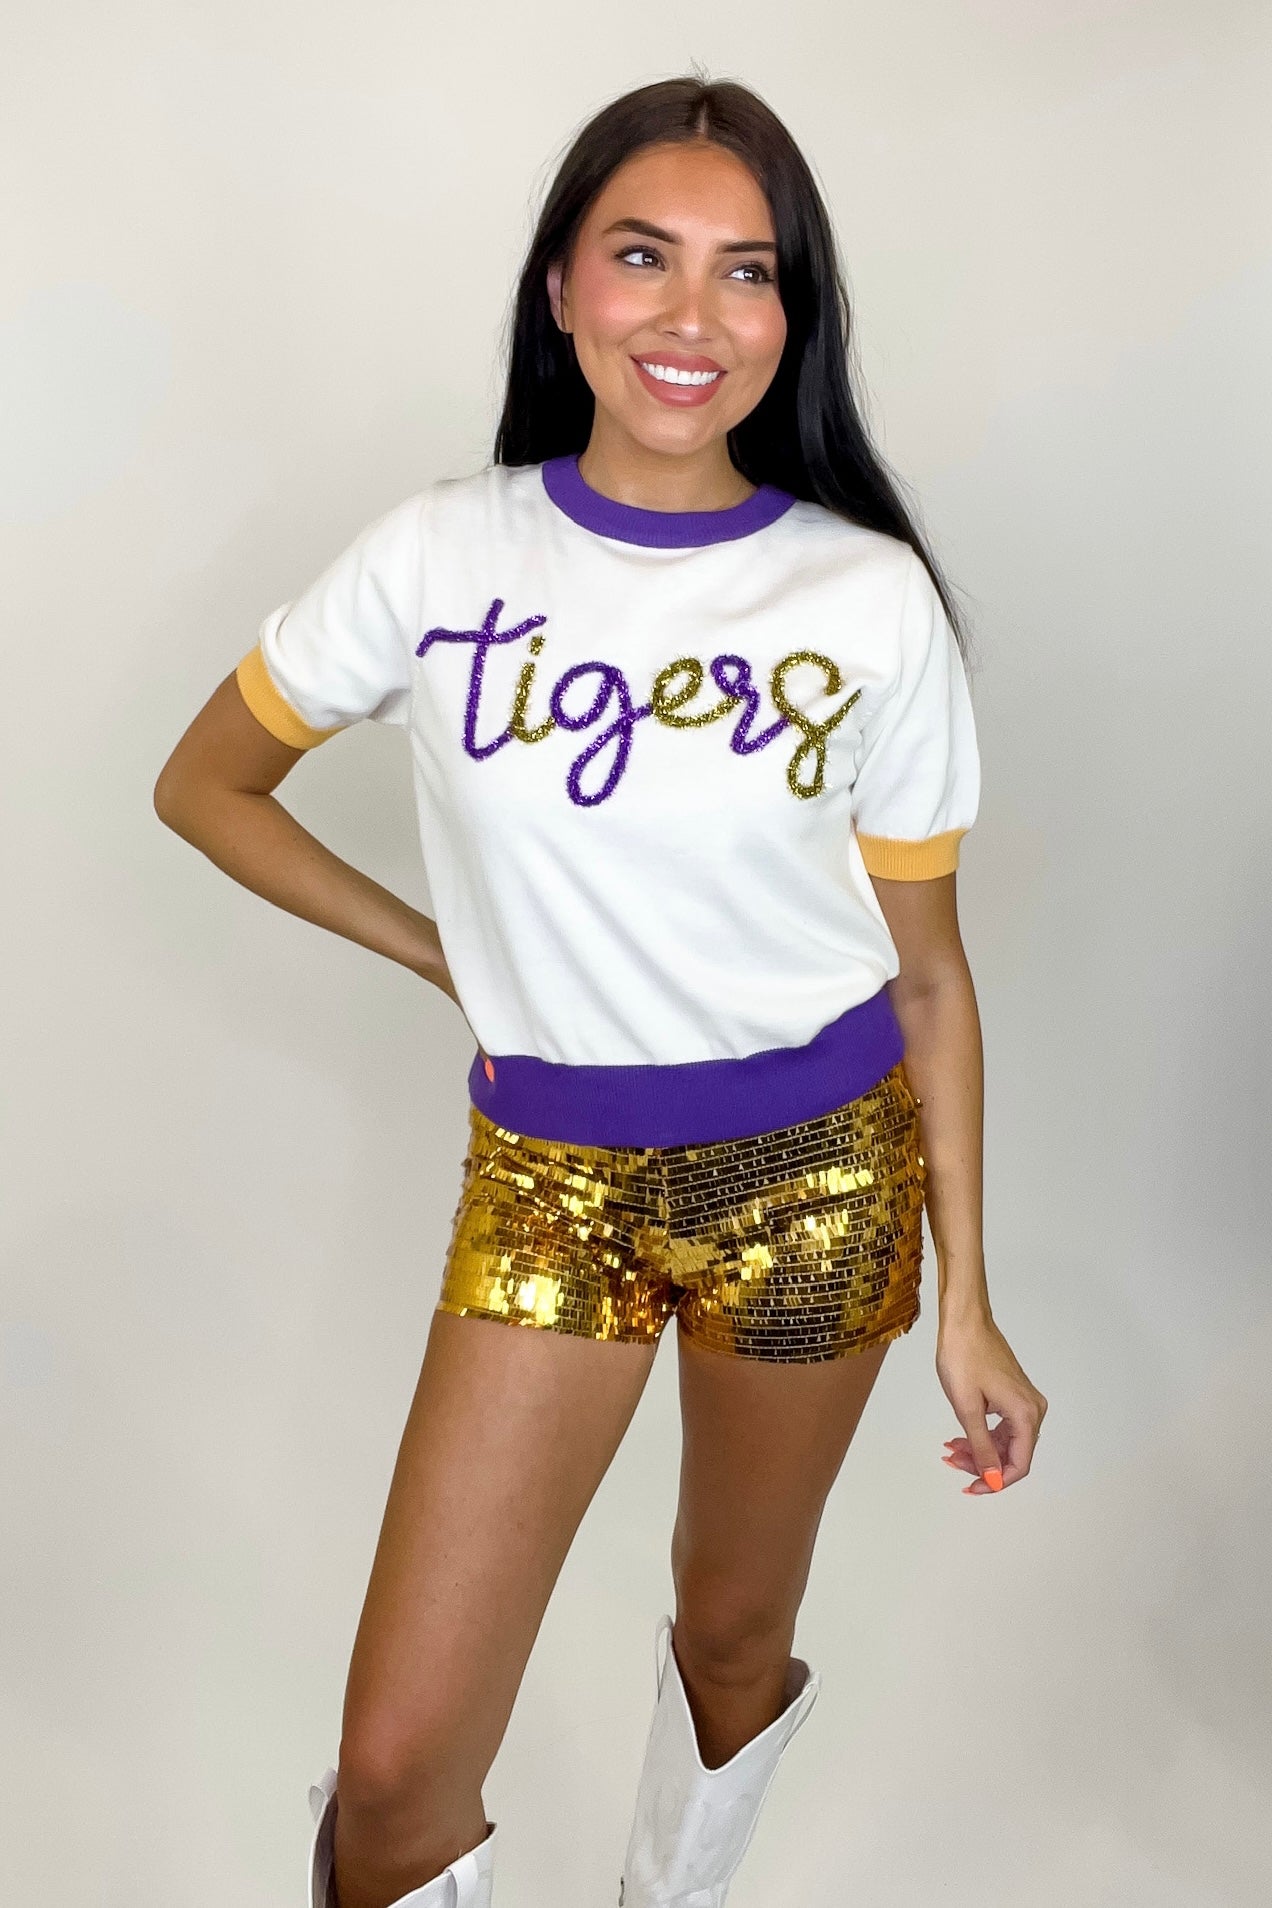 Ladies Geaux Tigers Sweater by Sparkle City